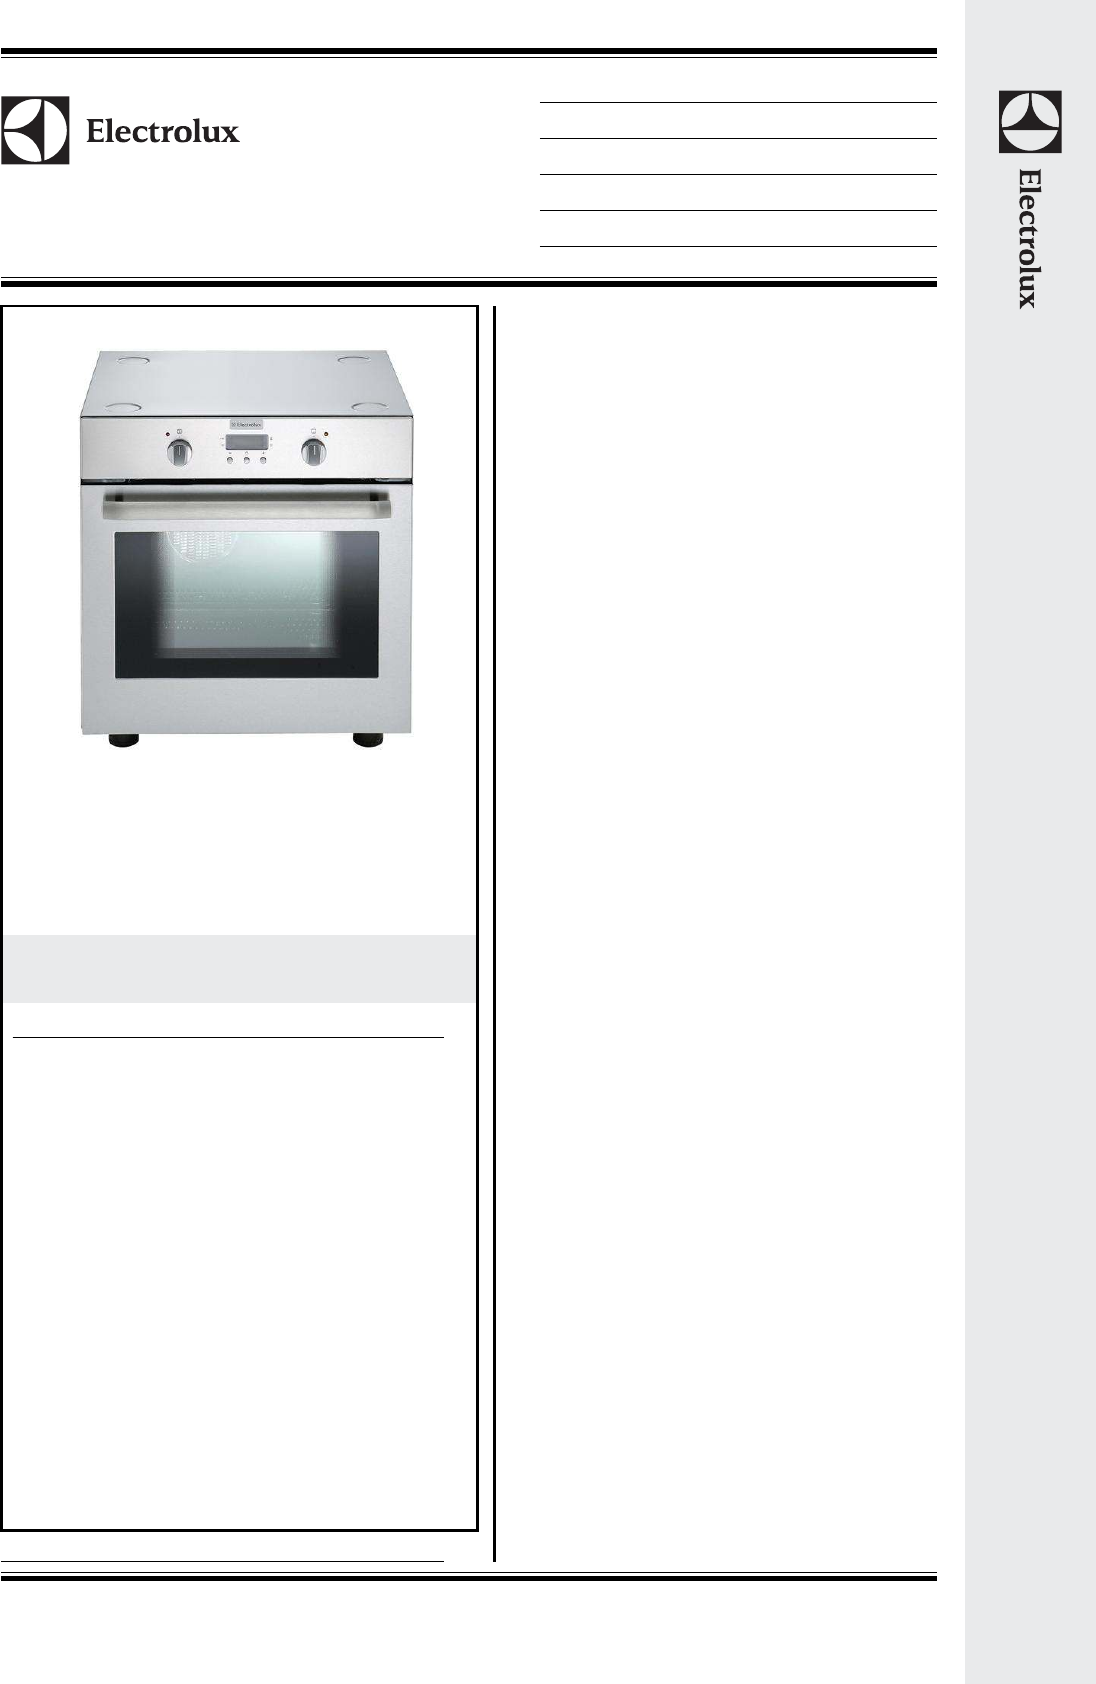 electrolux oven manual